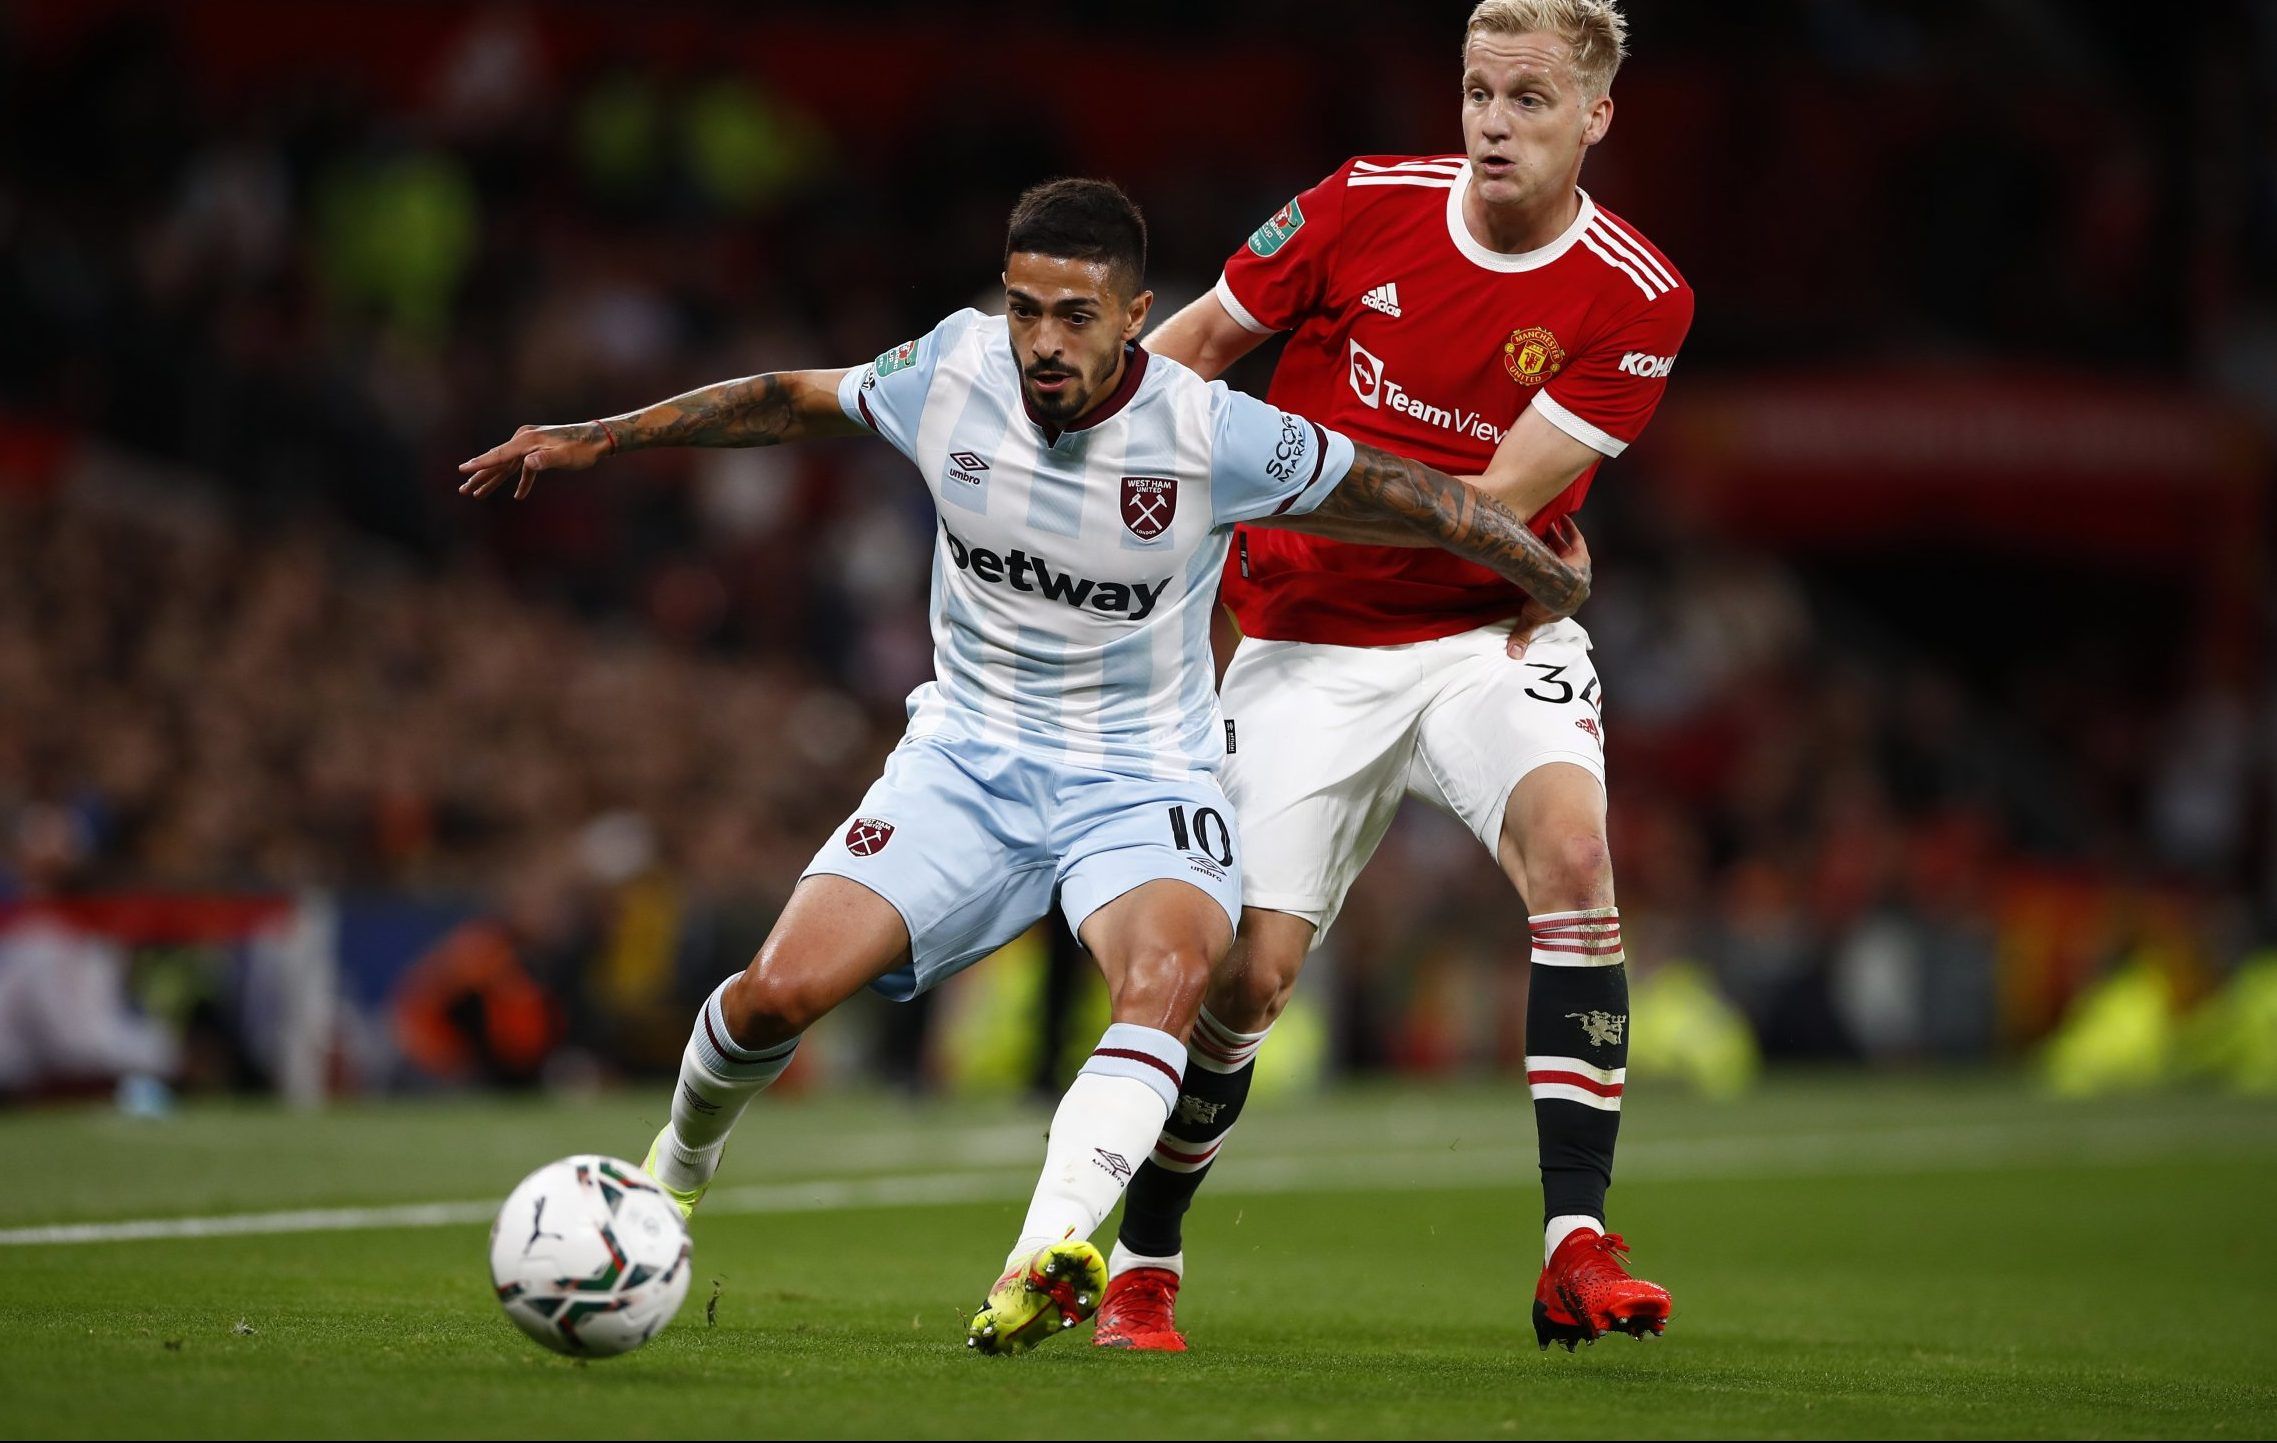 Manuel Lanzini in action for West Ham against Manchester United in the Carabao Cup